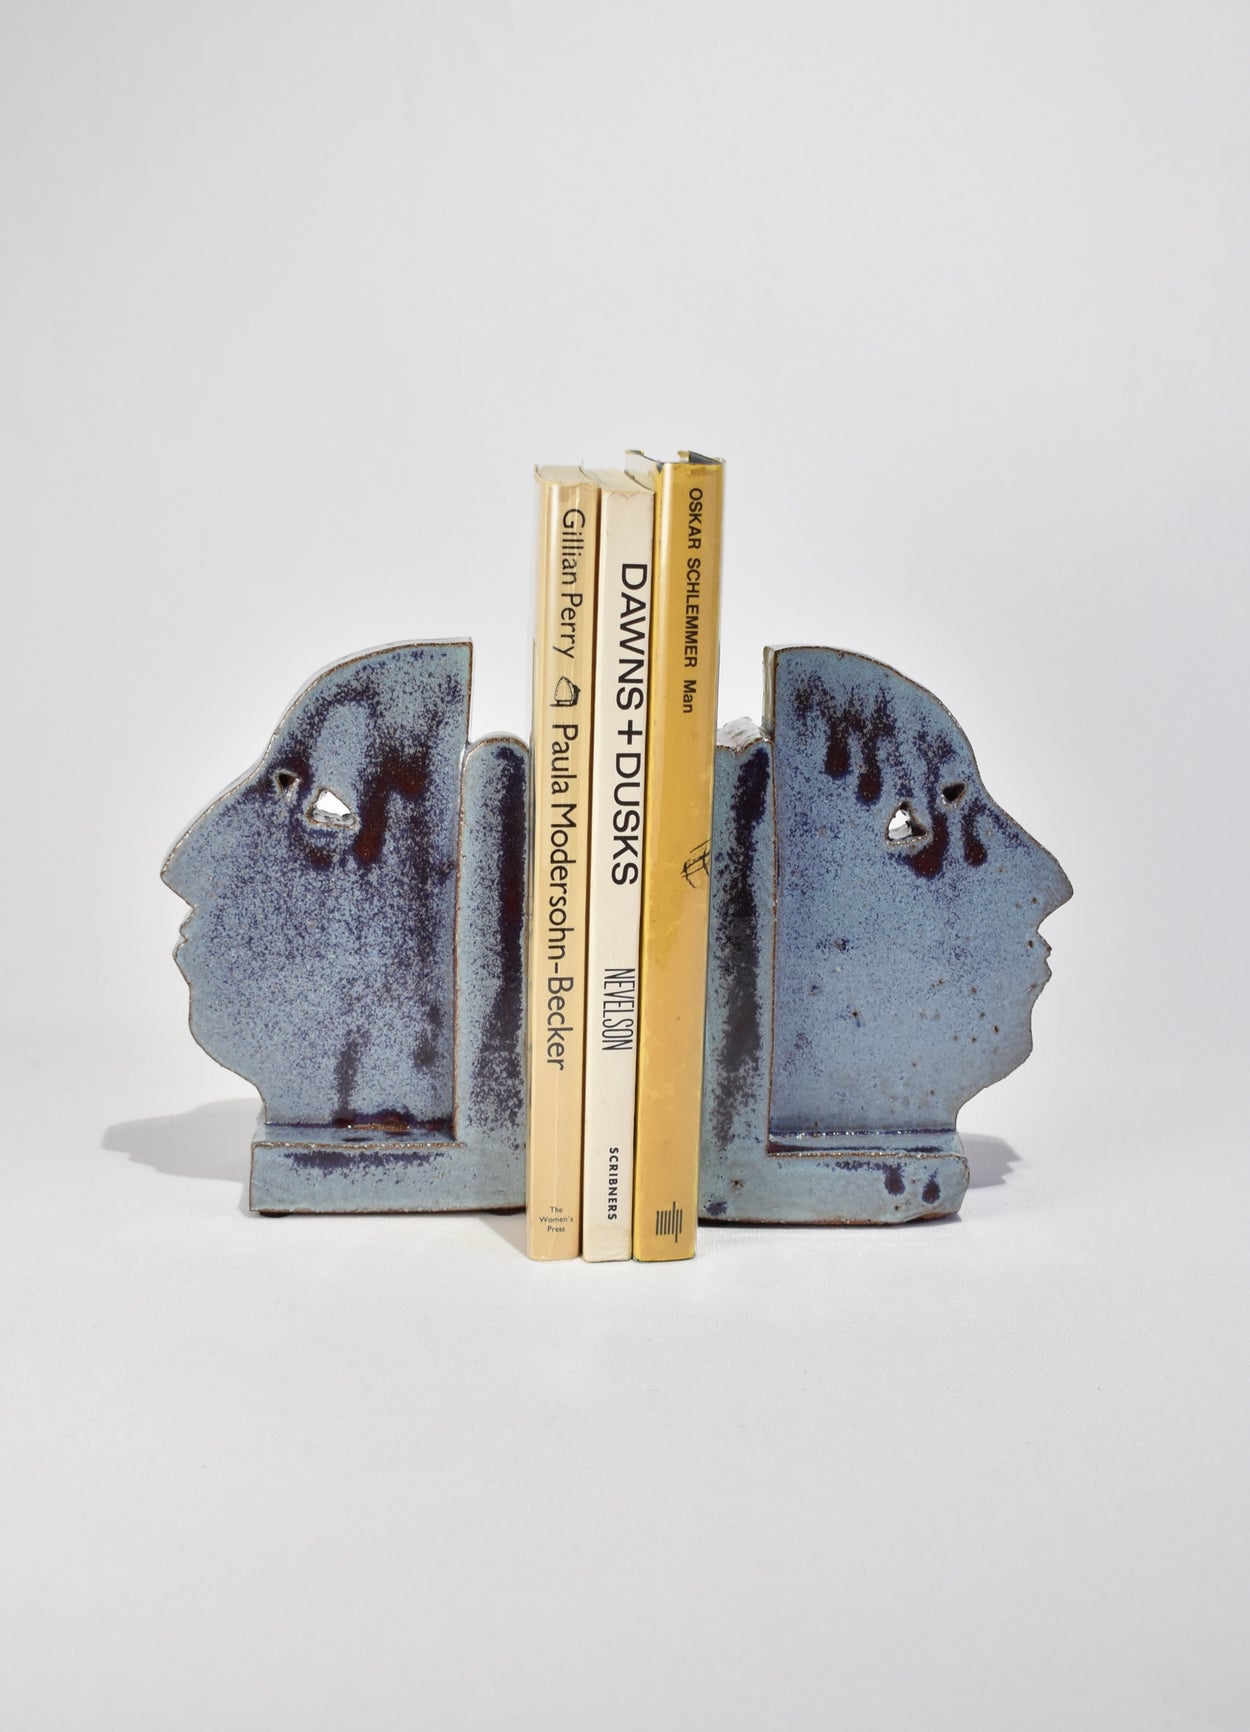 Profile Bookend in Speckled Blue